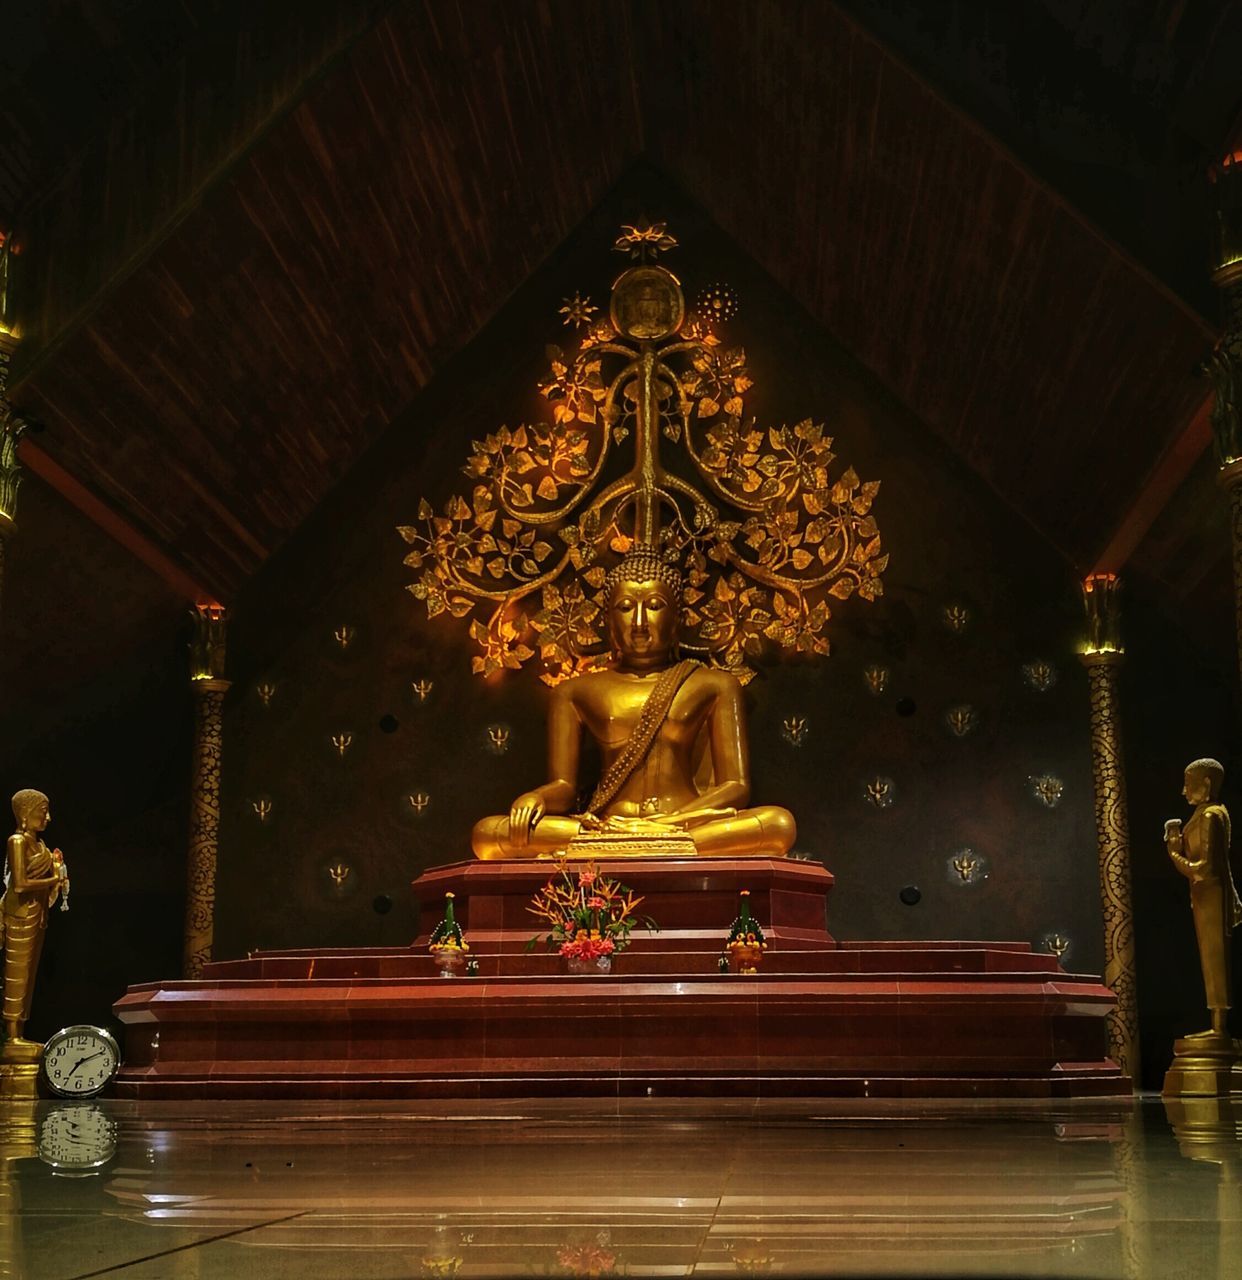 STATUE OF BUDDHA IN TEMPLE